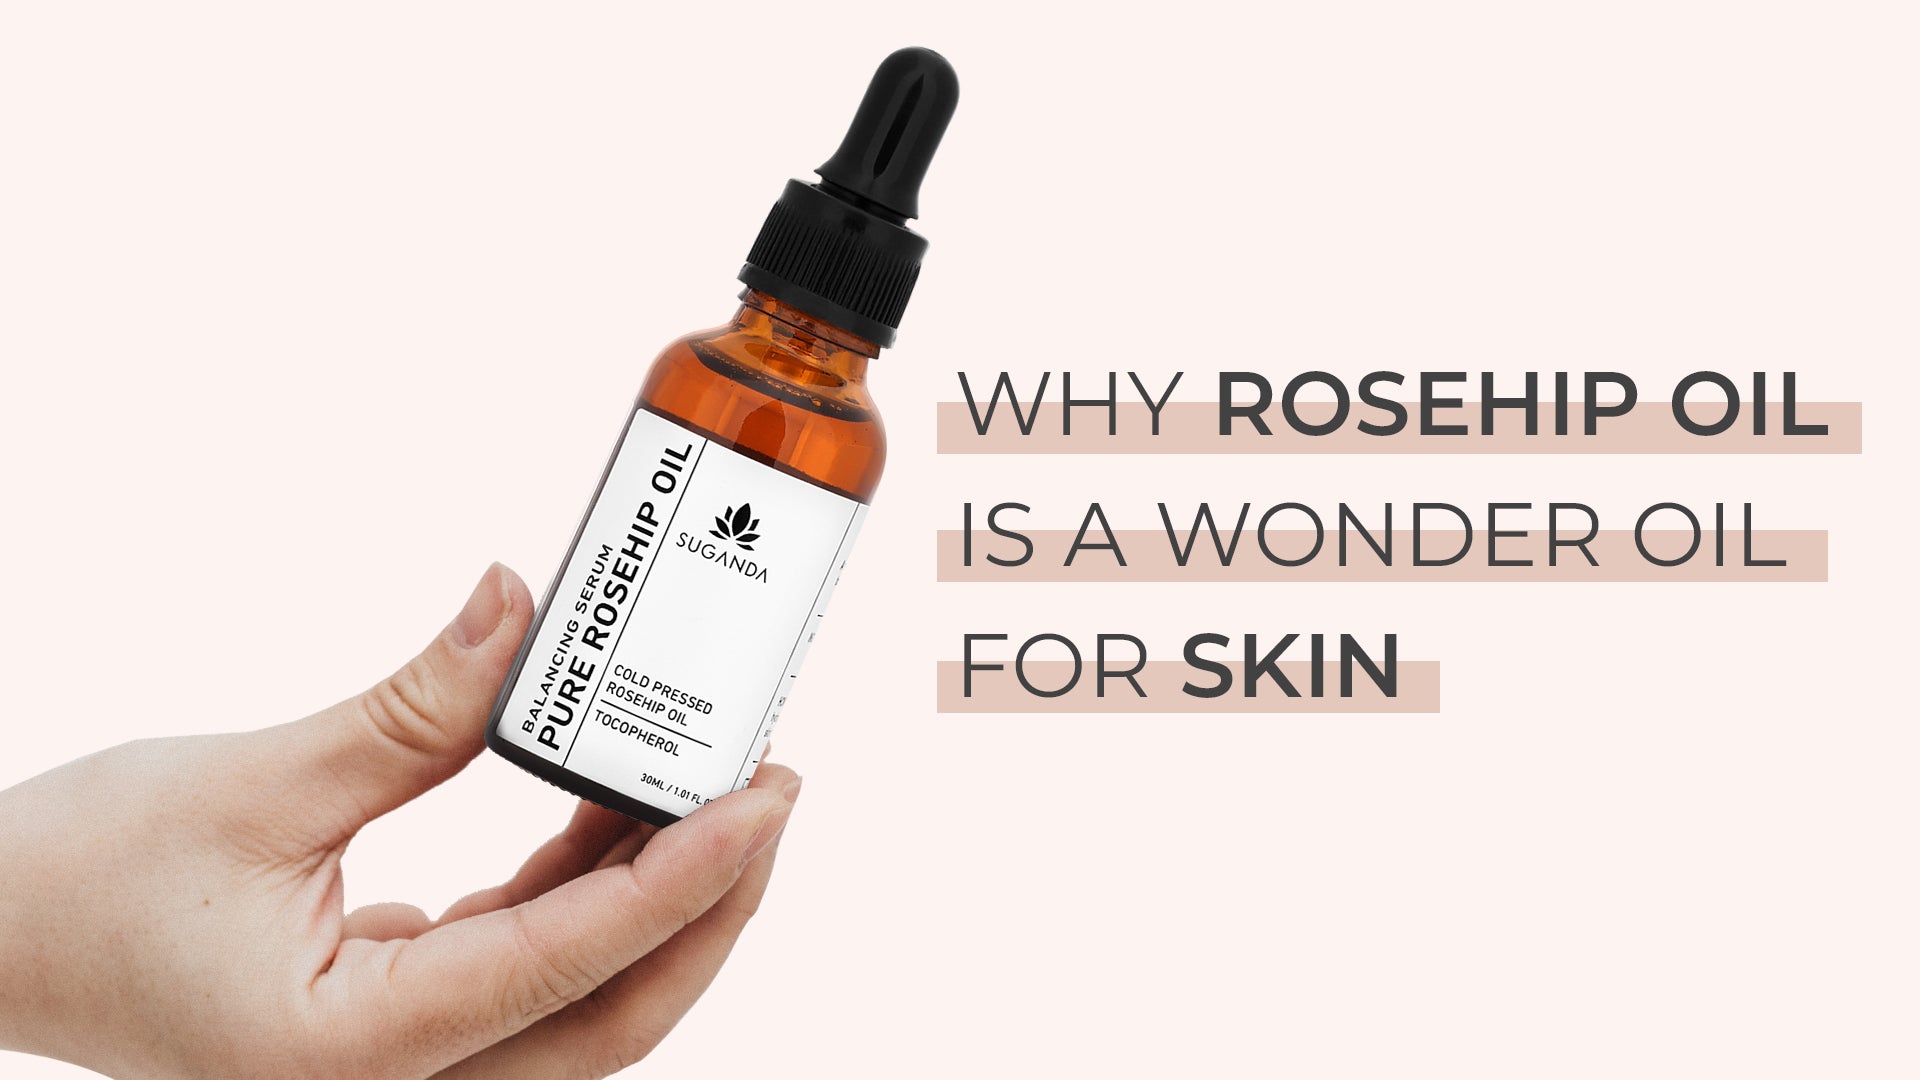 Why Rosehip Oil is A Wonder Oil For Skin?